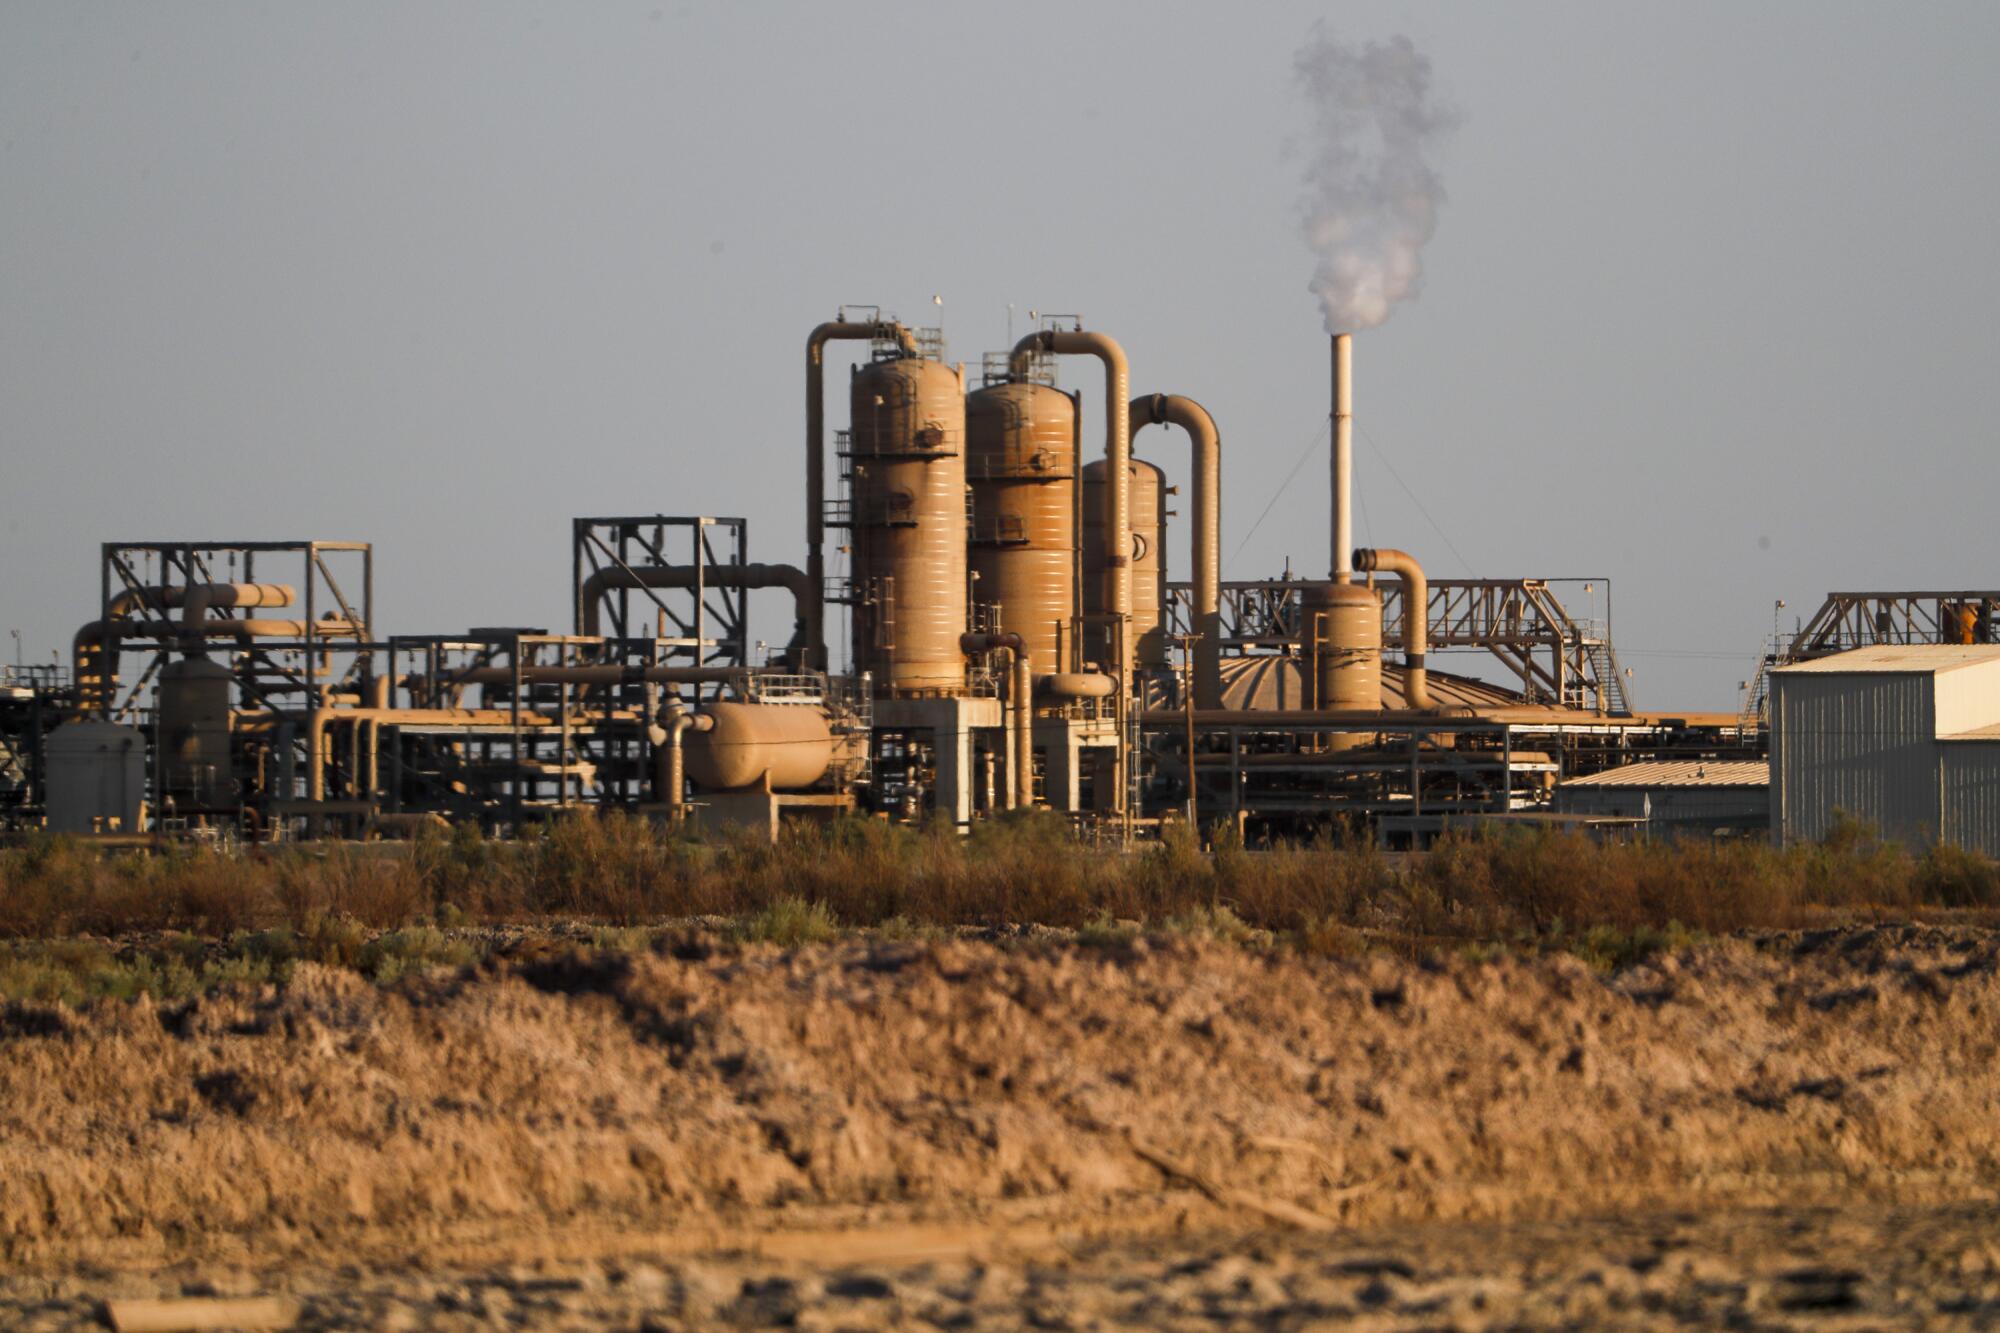 Steam is emitted by an operating geothermal power plant near the Salton Sea.